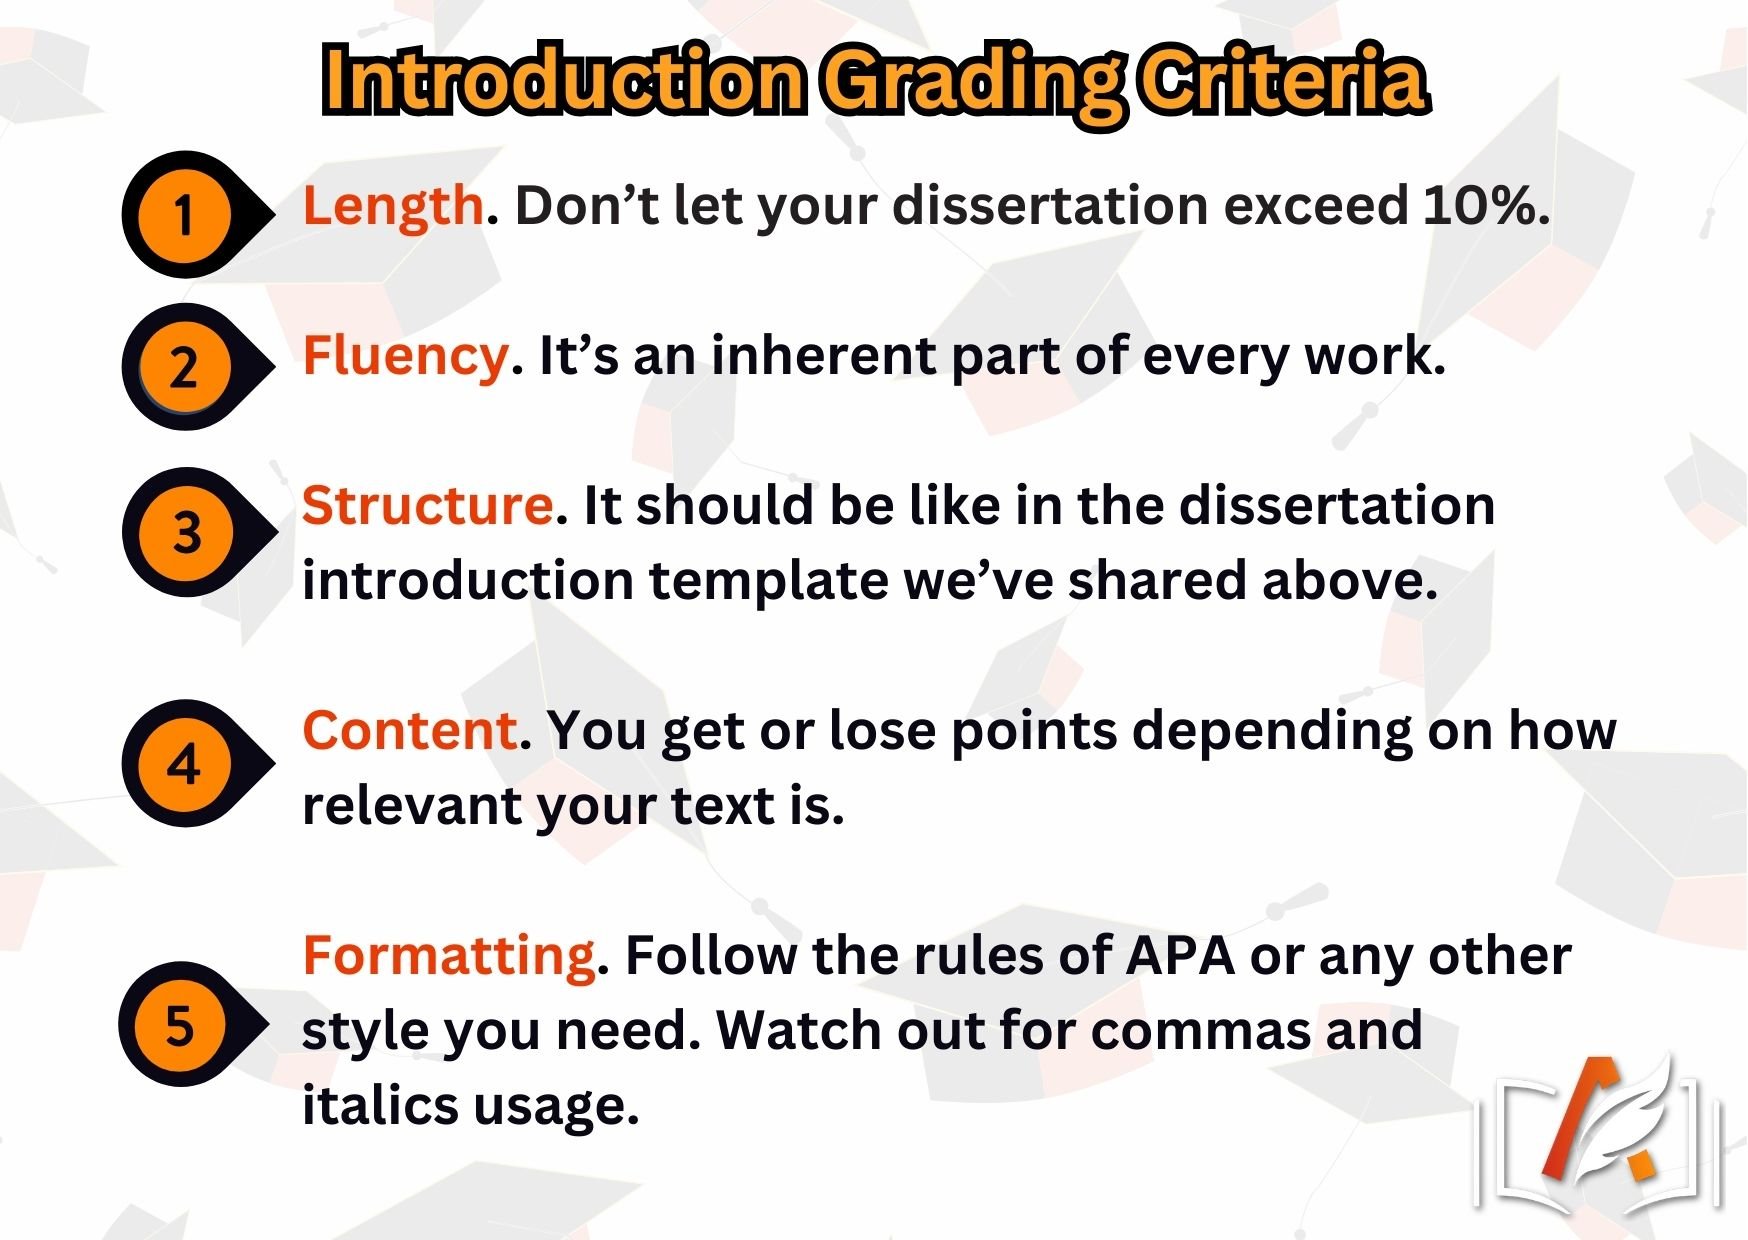 Evaluation criteria for the dissertation introduction